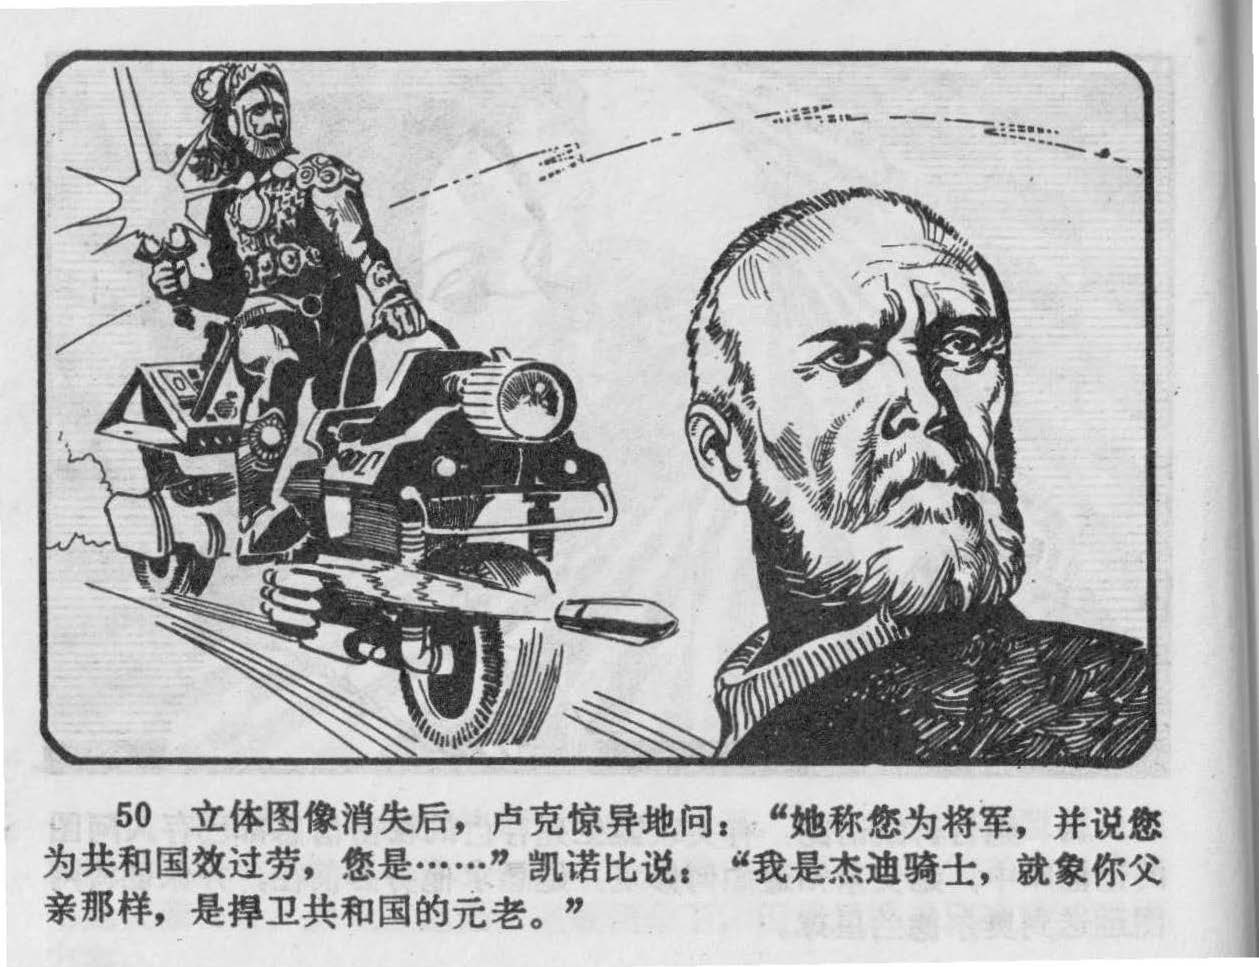 Chinese Star Wars Comic (Part 2 of 6): I am a Jedi Knight...